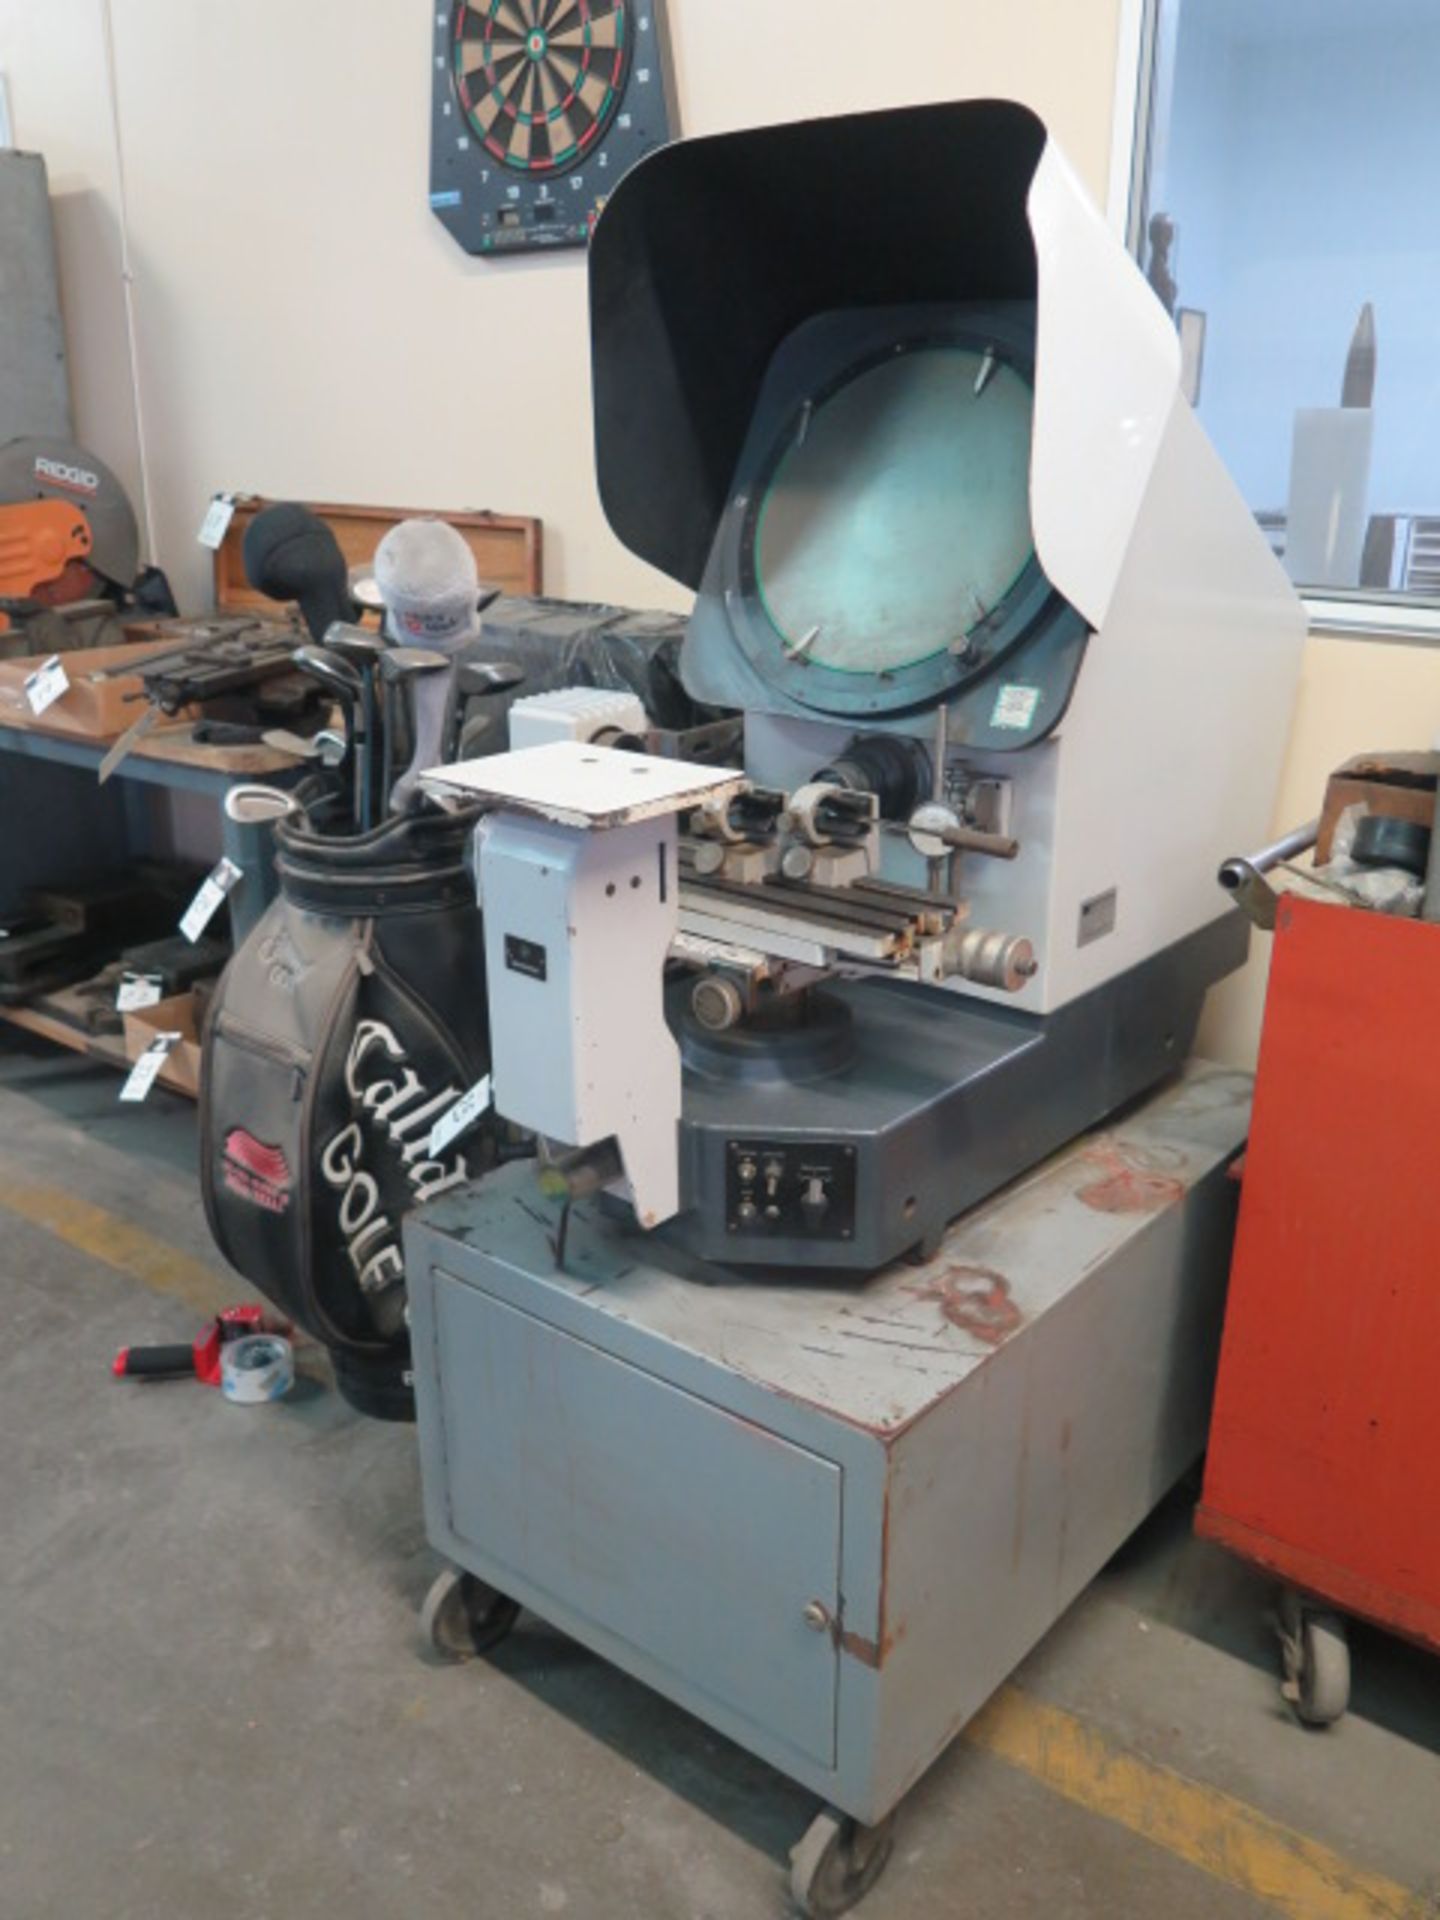 Mitutoyo PH-350 13” Optical Comparator s/n 9020 w/ Micrometer and Dial Indicator Readouts, Surface - Image 2 of 7